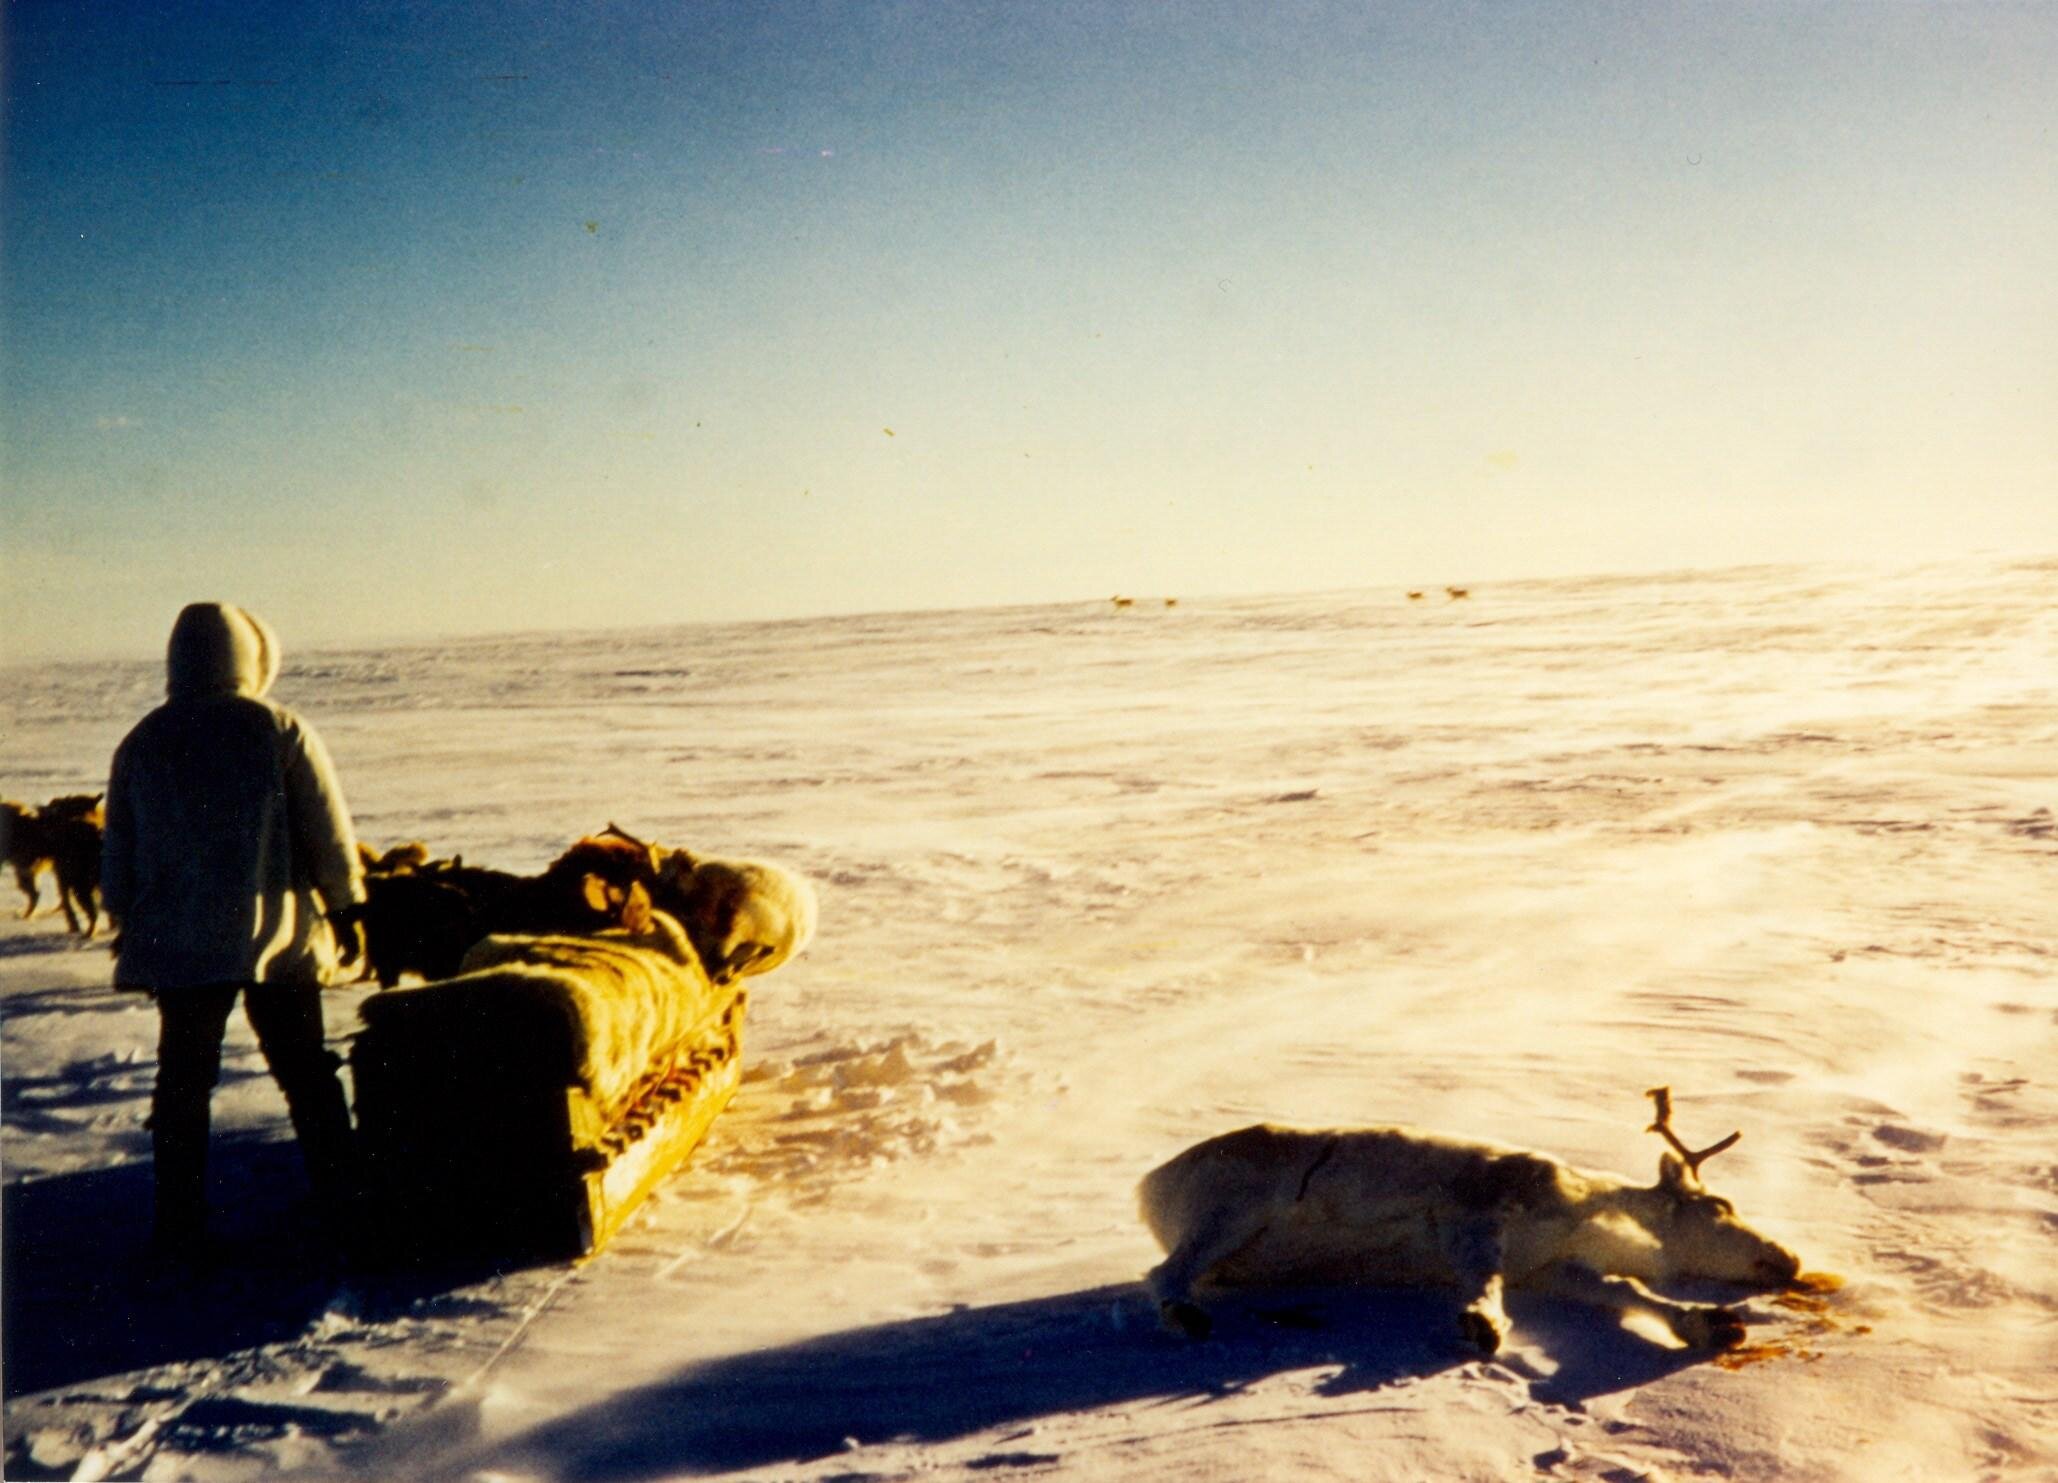 Photo: Peter Esau Hunting Caribou, from Inuvialuit Cultural Centre Digital Library